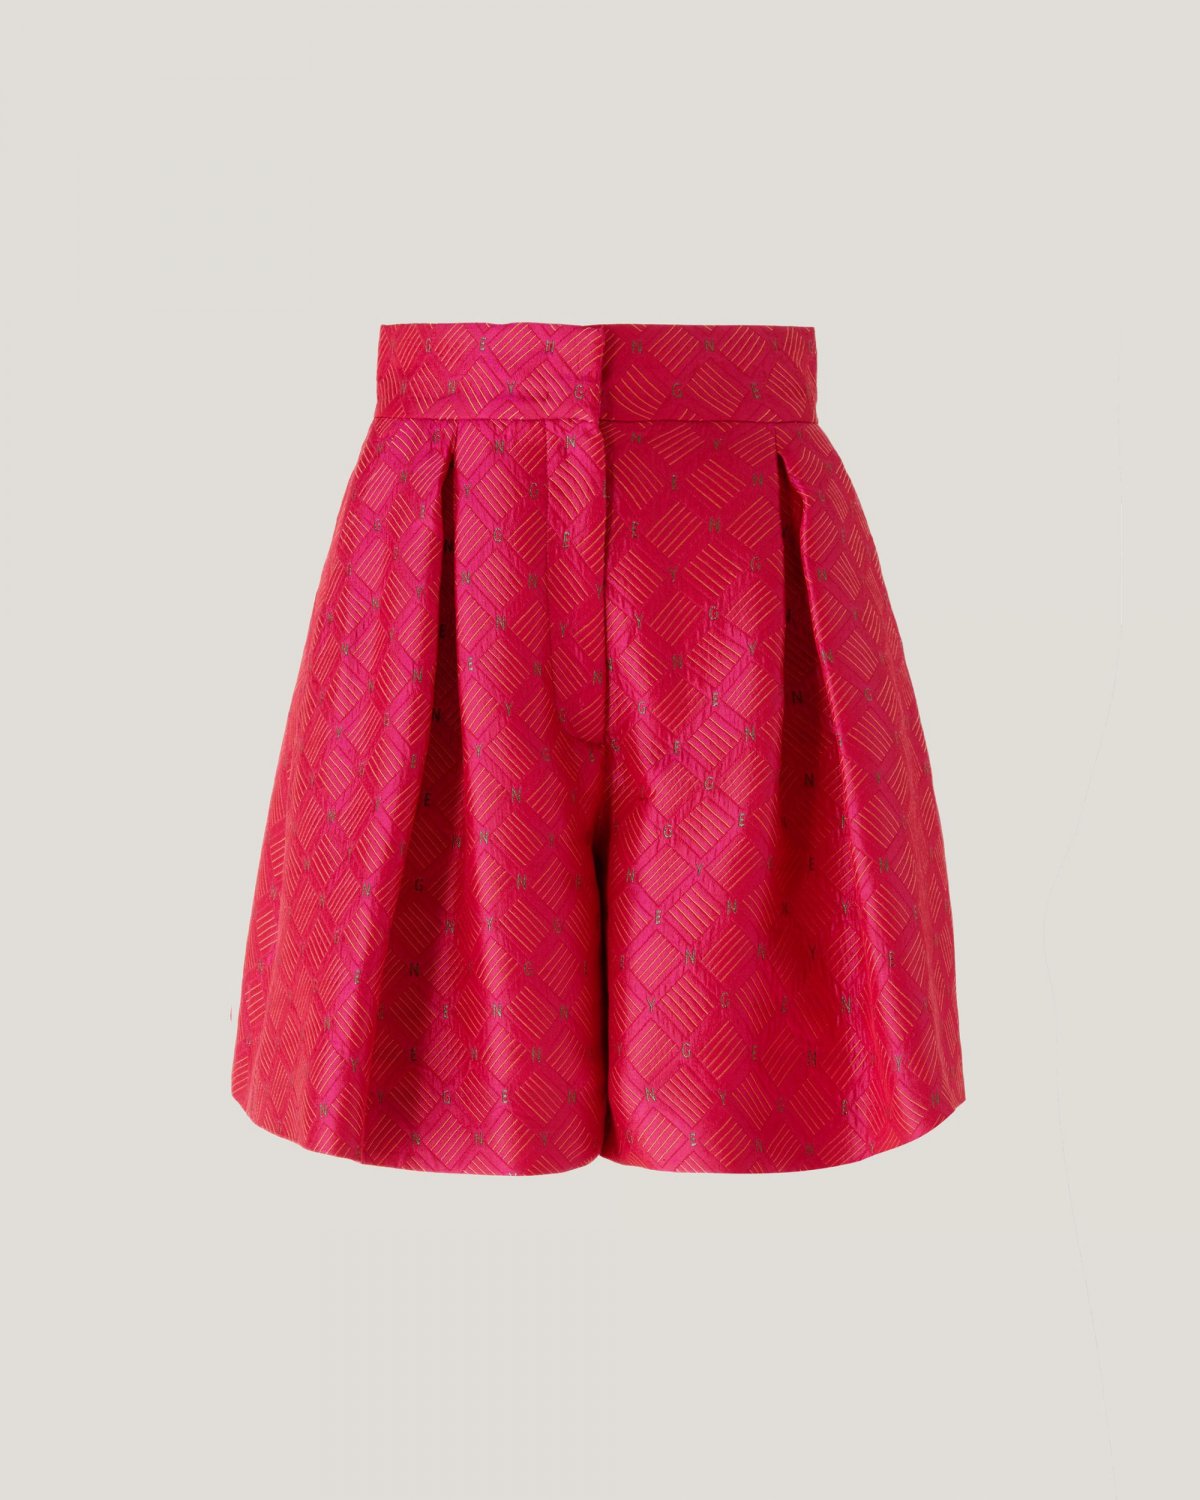 Shorts with pleats | Spring Summer 2023 Collection, 73_74, Cruise 2023 Collection, Warm weather wear, Ready to Wear, New Arrivals, Sale, Summer Sale, Mid season sale -40% | Genny